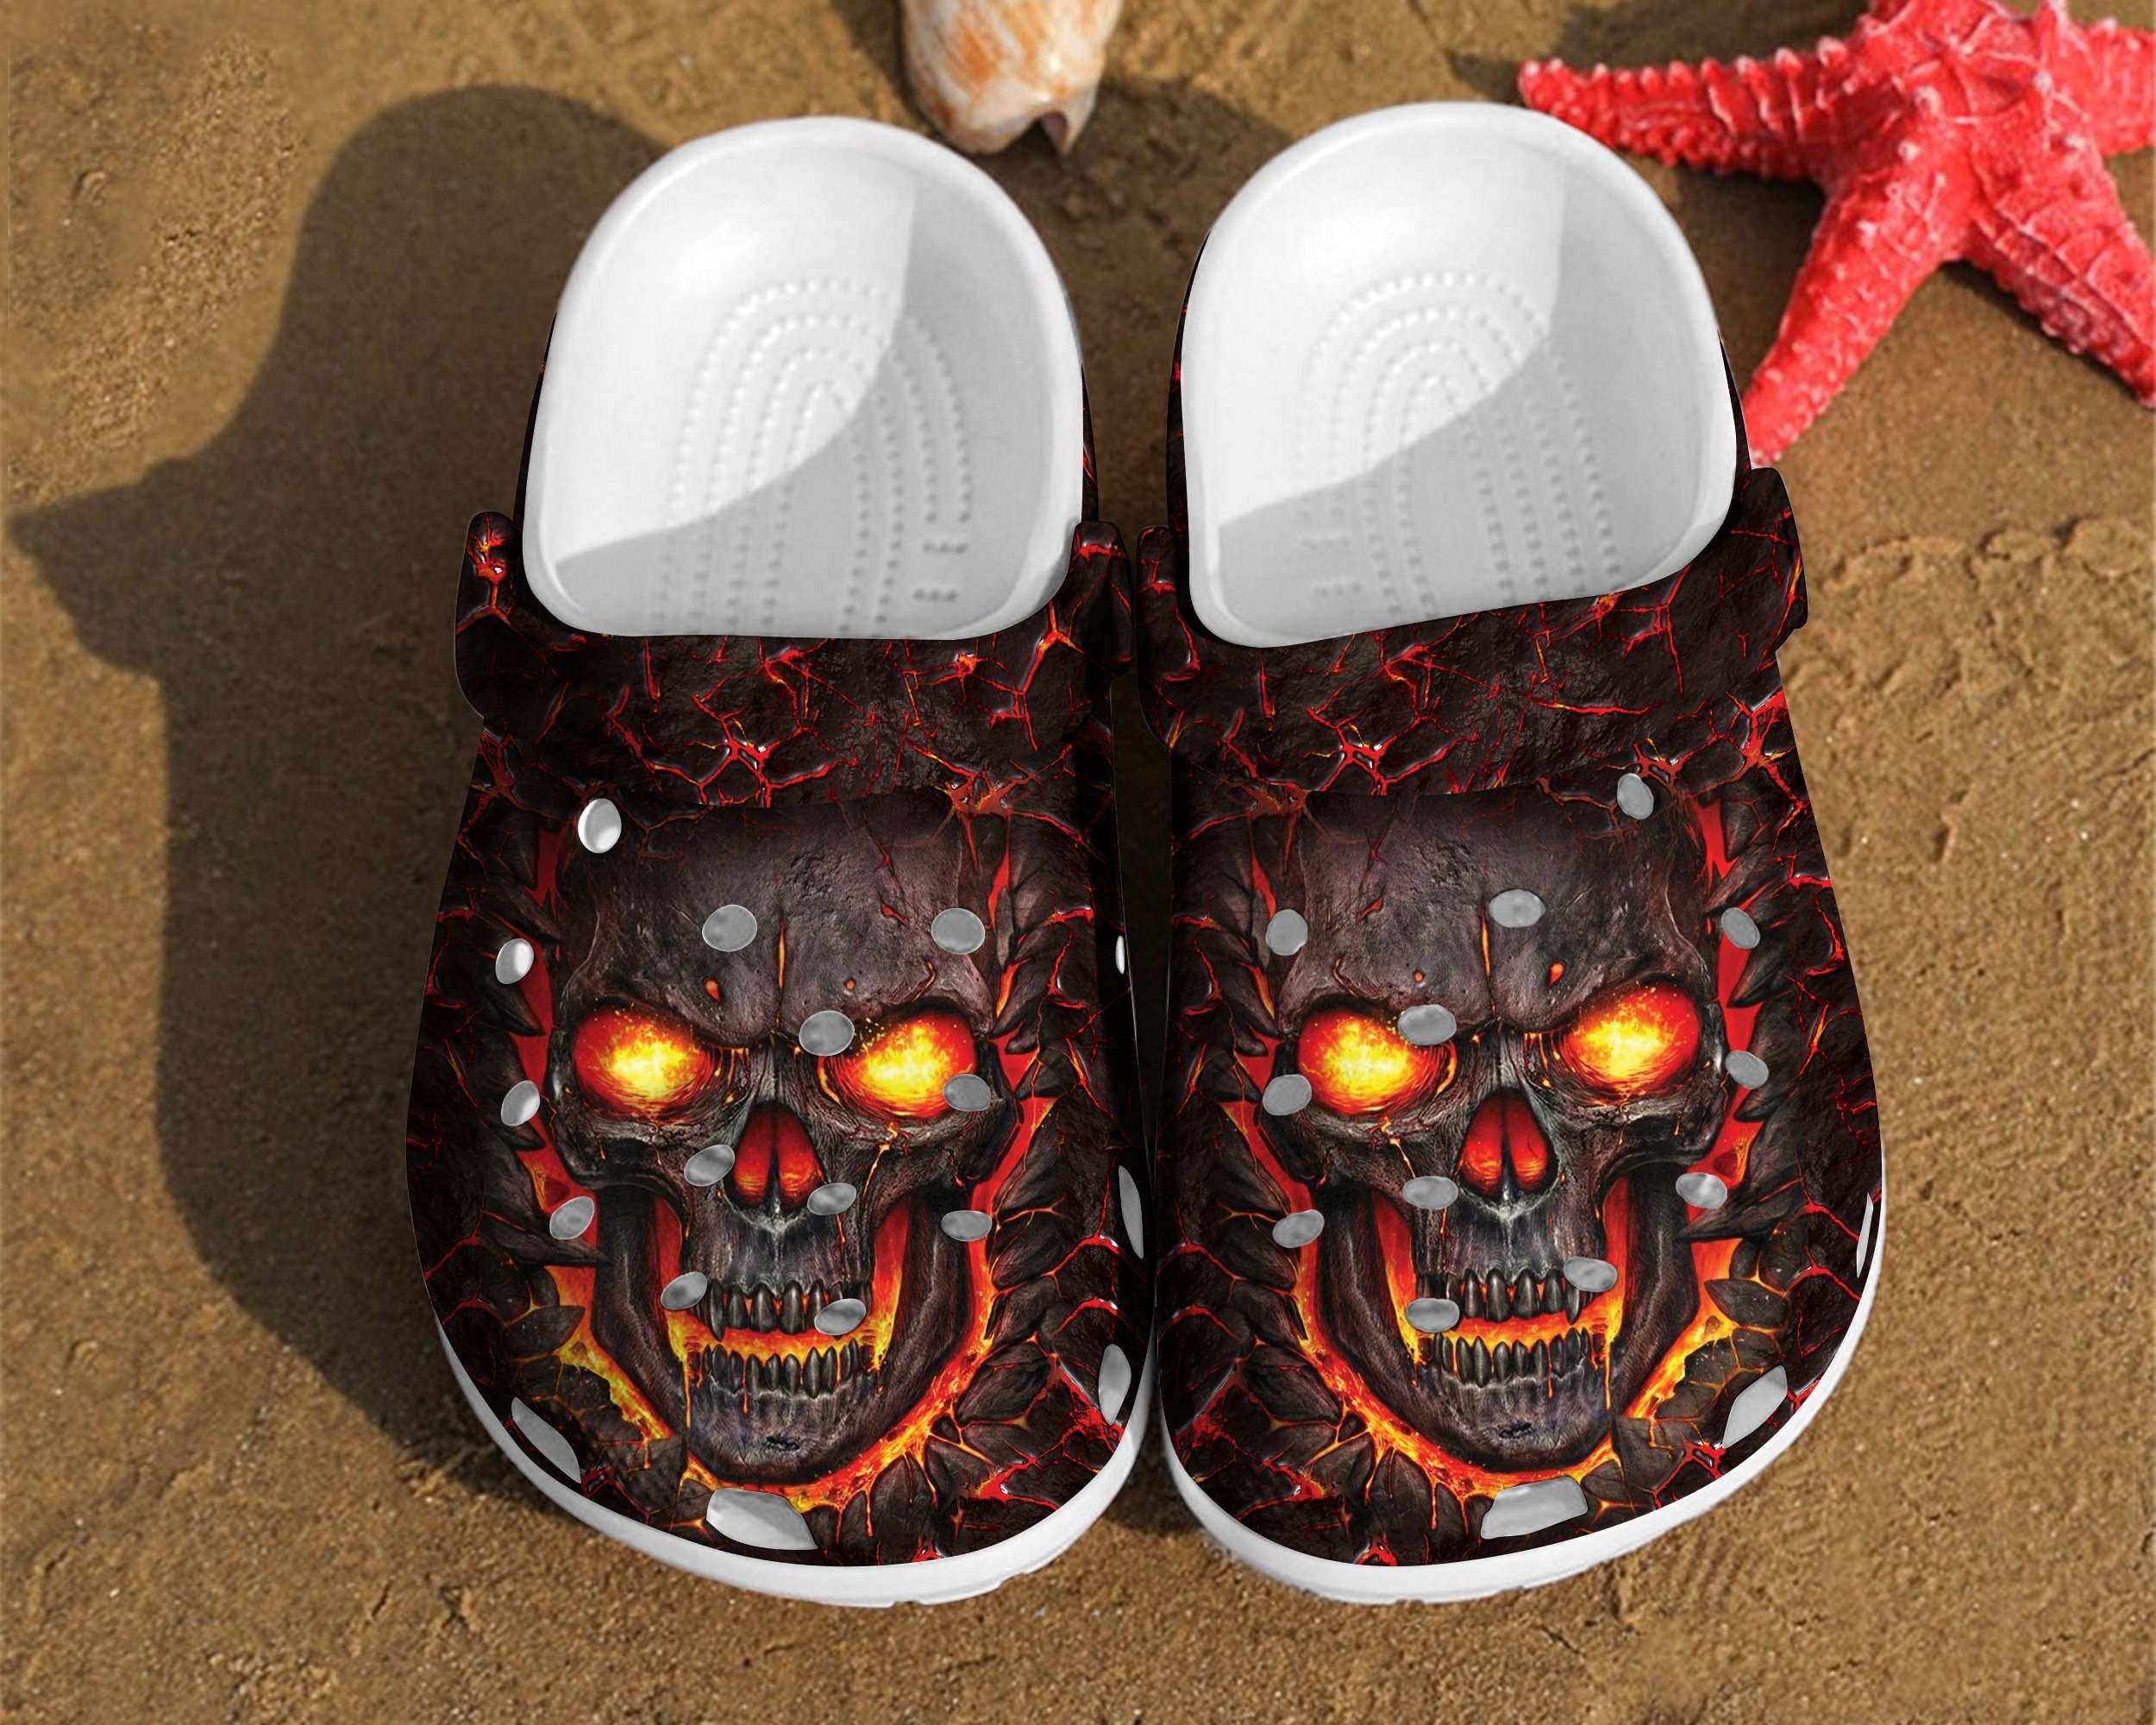 Skull Art Fire Motorcycle Lovers Gift For Fan Classic Water 3D Crocband Clog